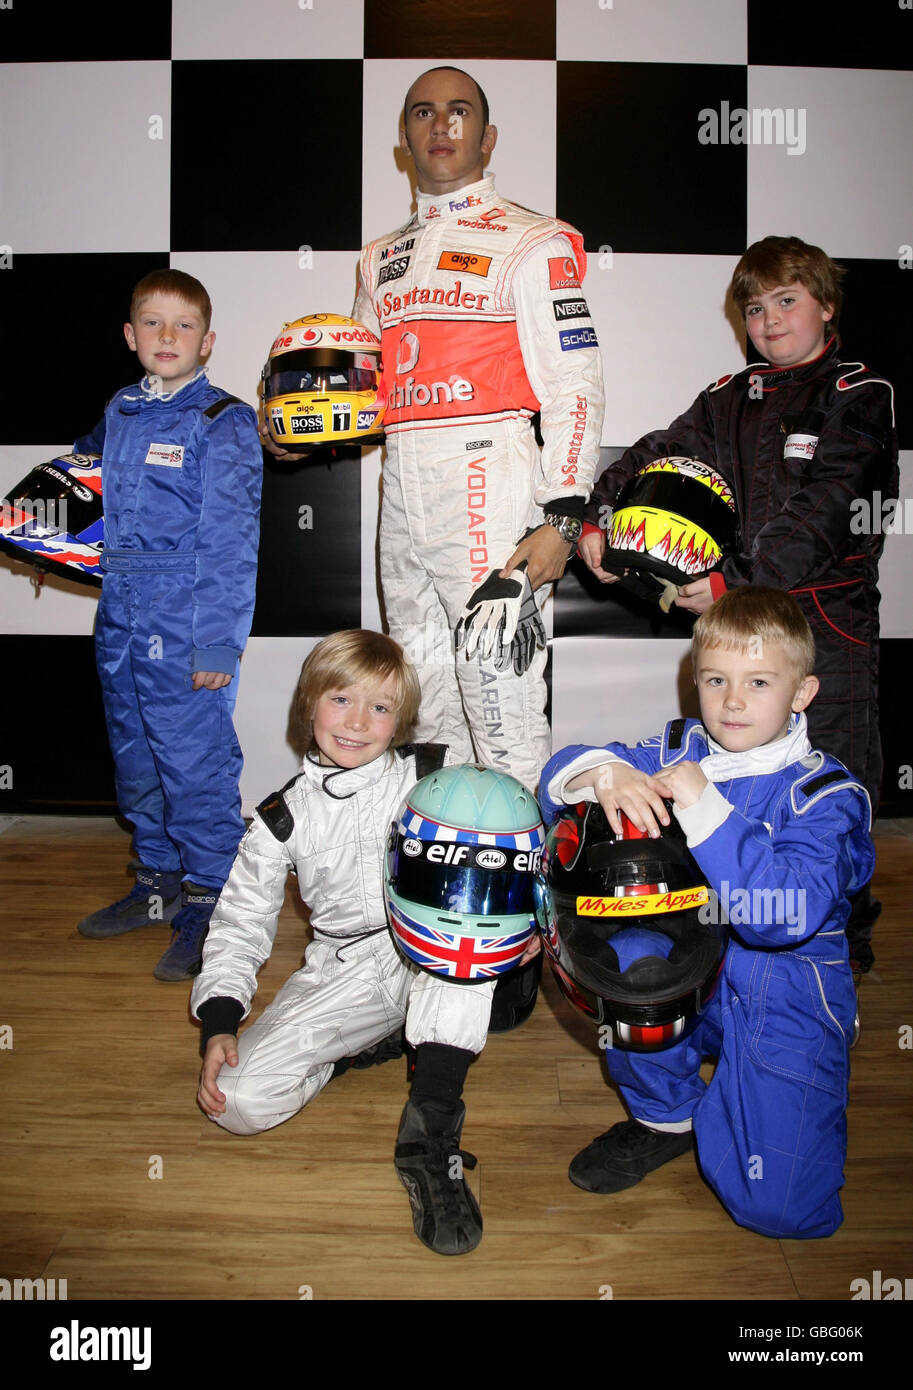 Four young members of the Buckmore Park Karting Club in Kent - the karting club where Hamilton was discovered - (left to right) Dave Wooder, 9, Billy Monger, 9, Myles Apps, 8 and Archie Tillett, 8, stand next to a waxwork of Formula One World Champion Lewis Hamilton as it is unveiled at Madame Tussauds in central London. Stock Photo